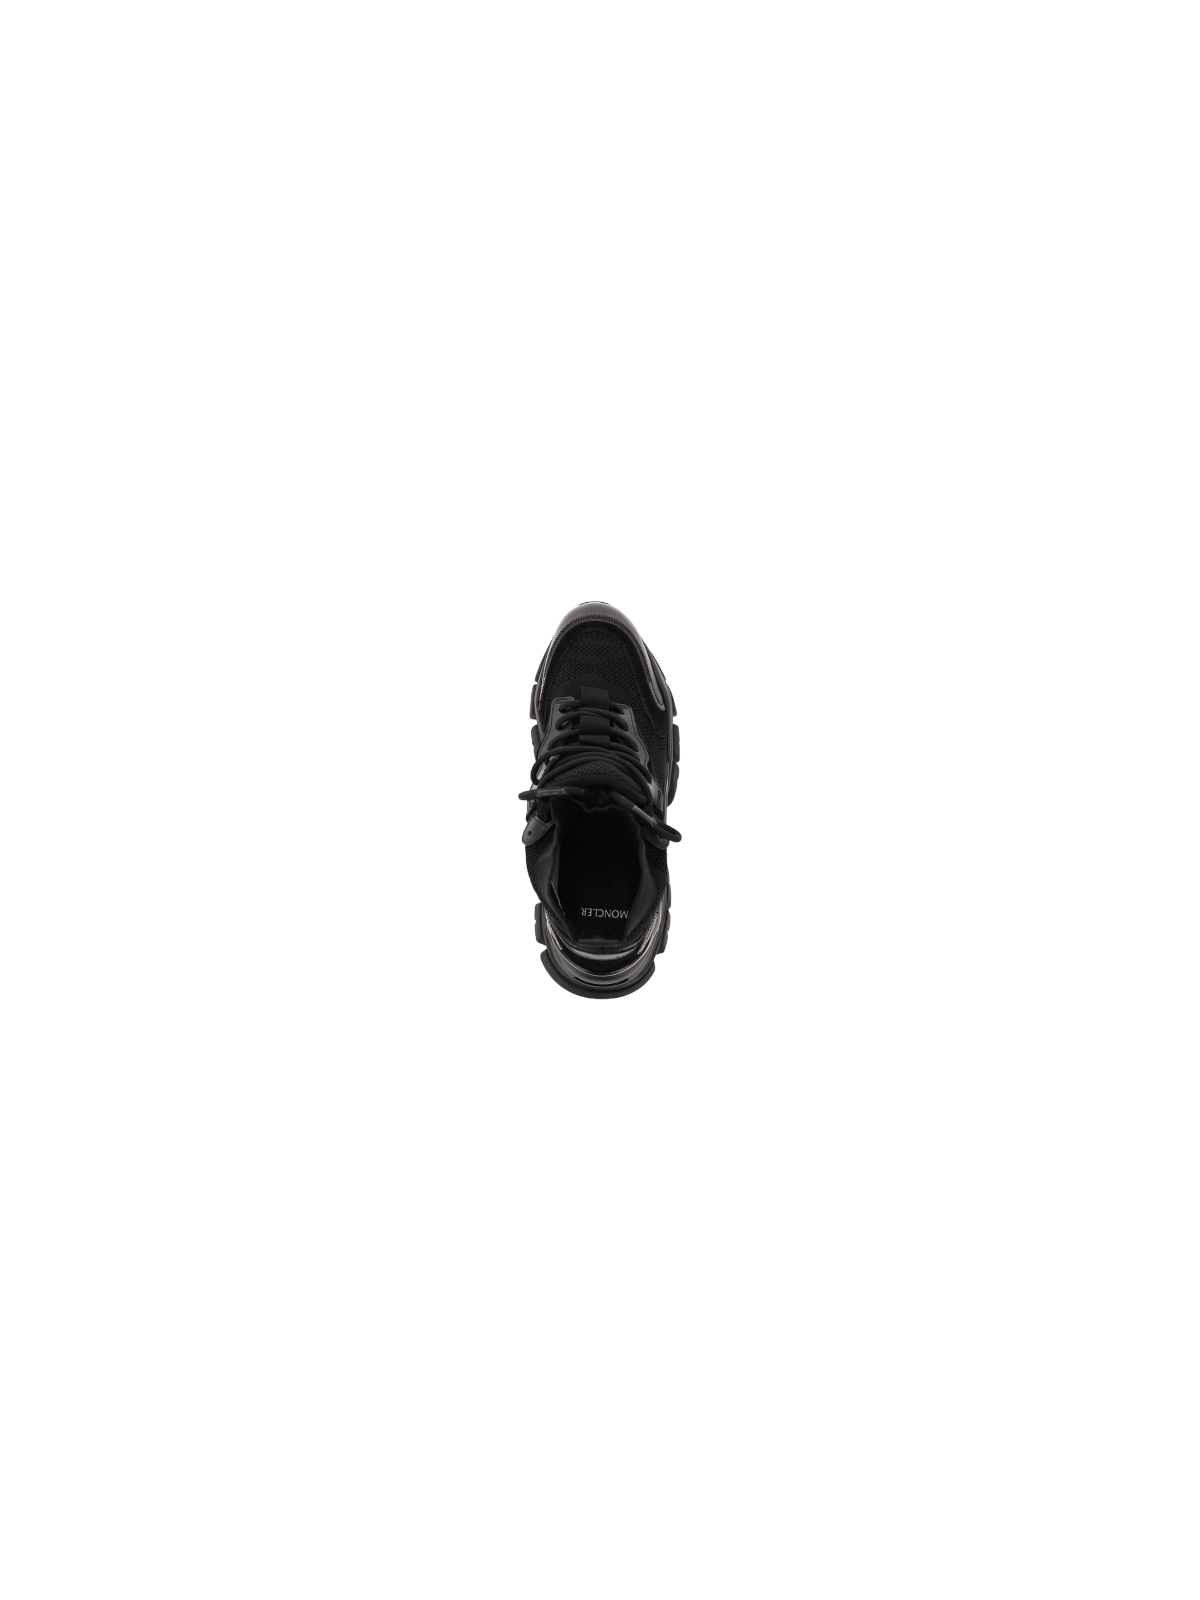 Moncler Leave No Trace Hi-Top Sneakers